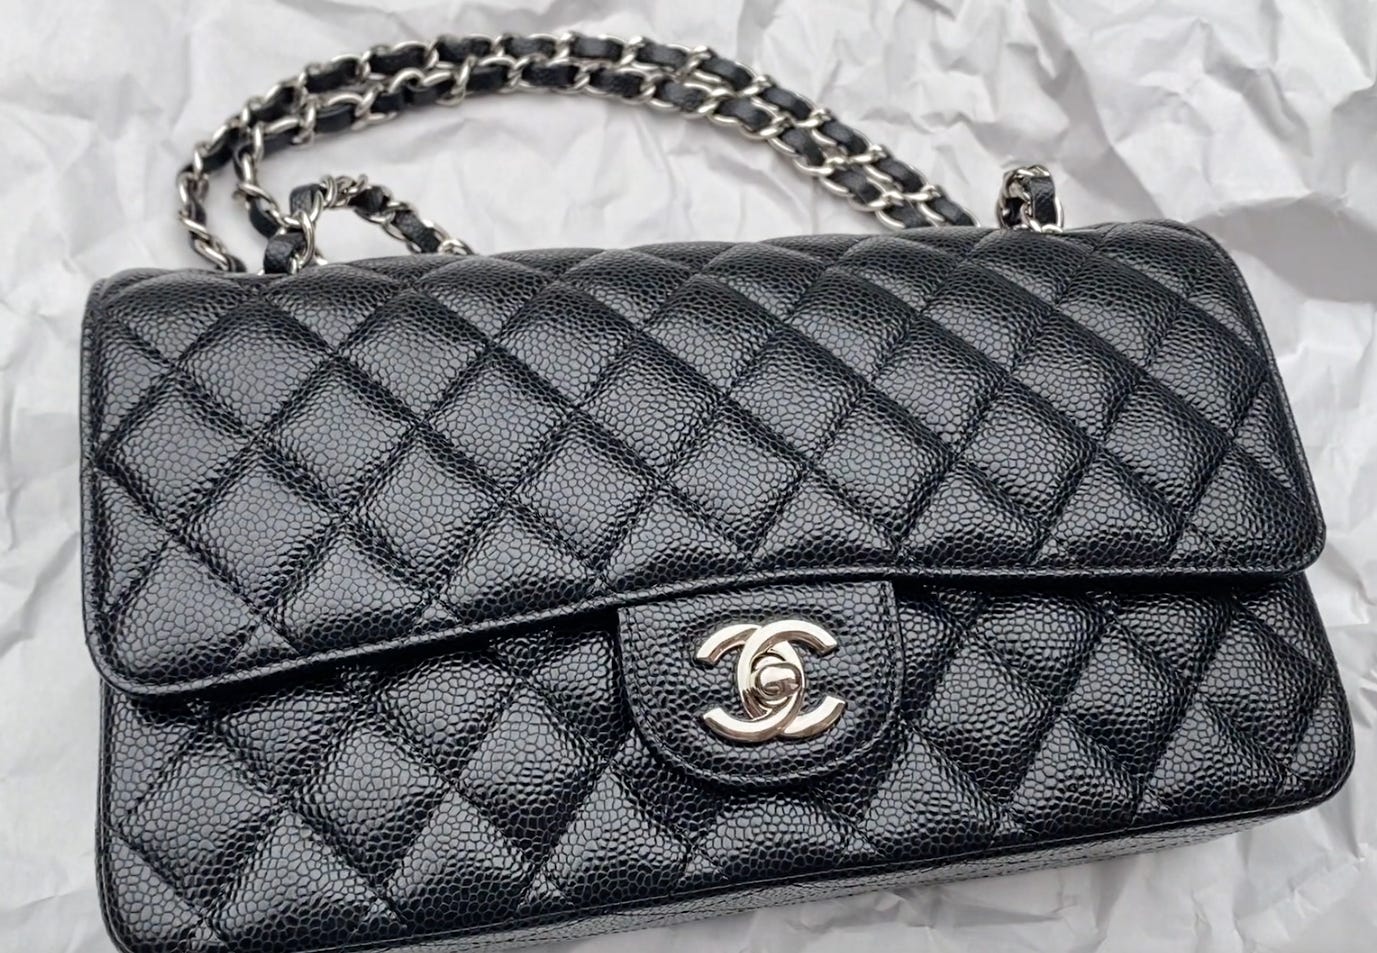 How I Ended Up With a Fake Chanel Caviar Double Flap Bag